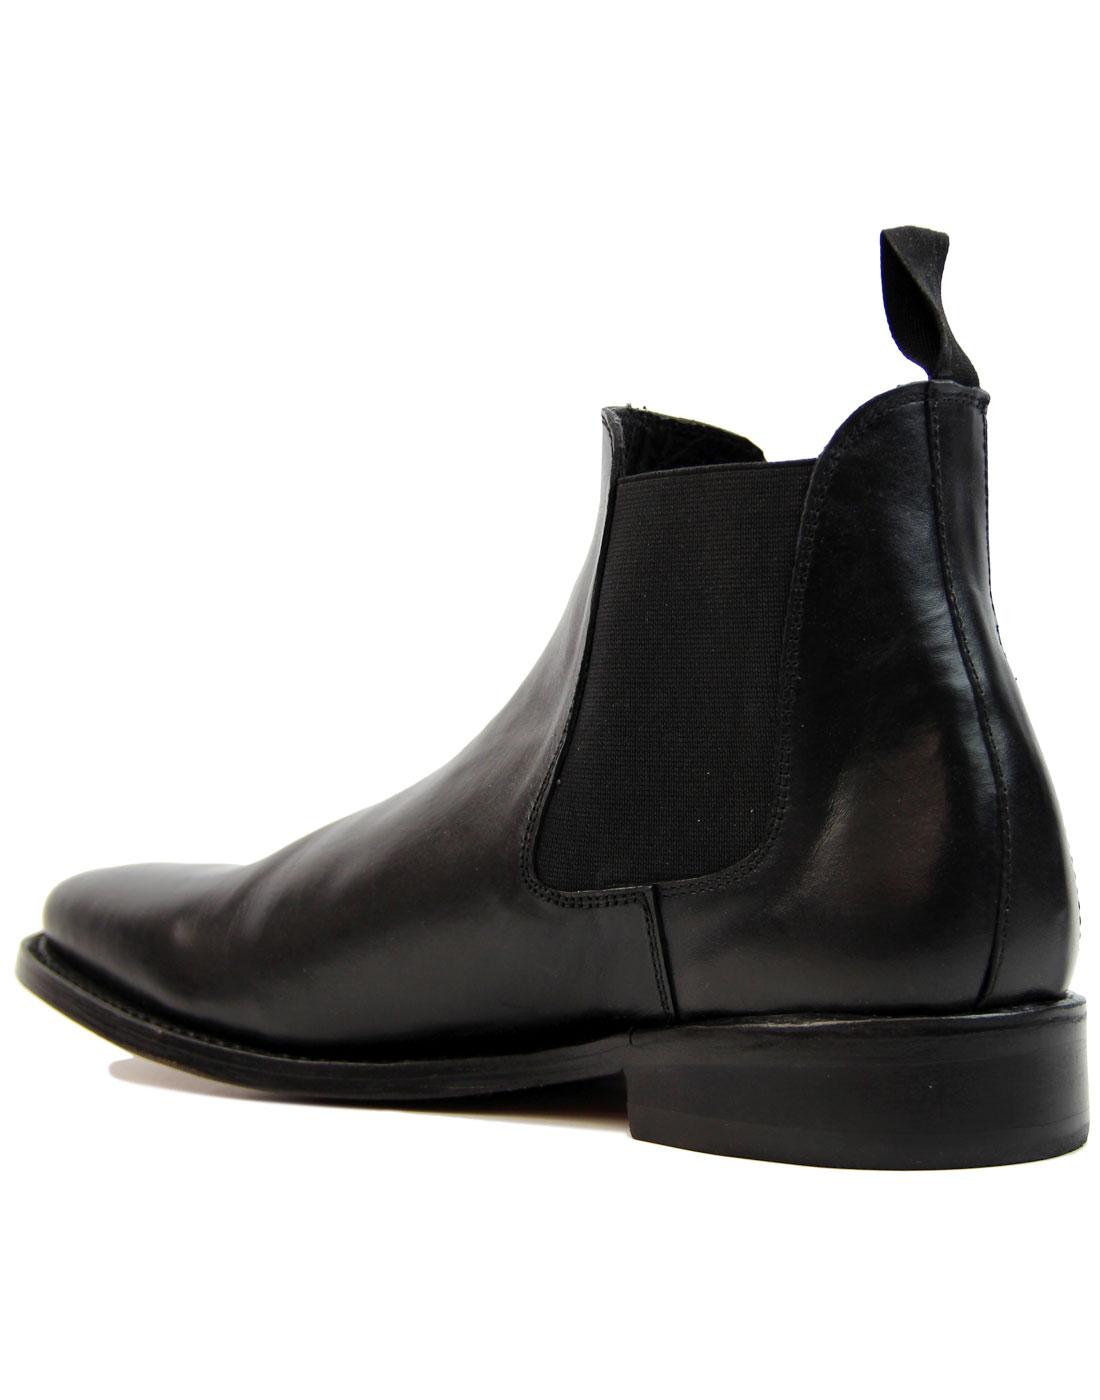 Sloane KENSINGTON Retro Mod Leather Goodyear Welted Chelsea Boots